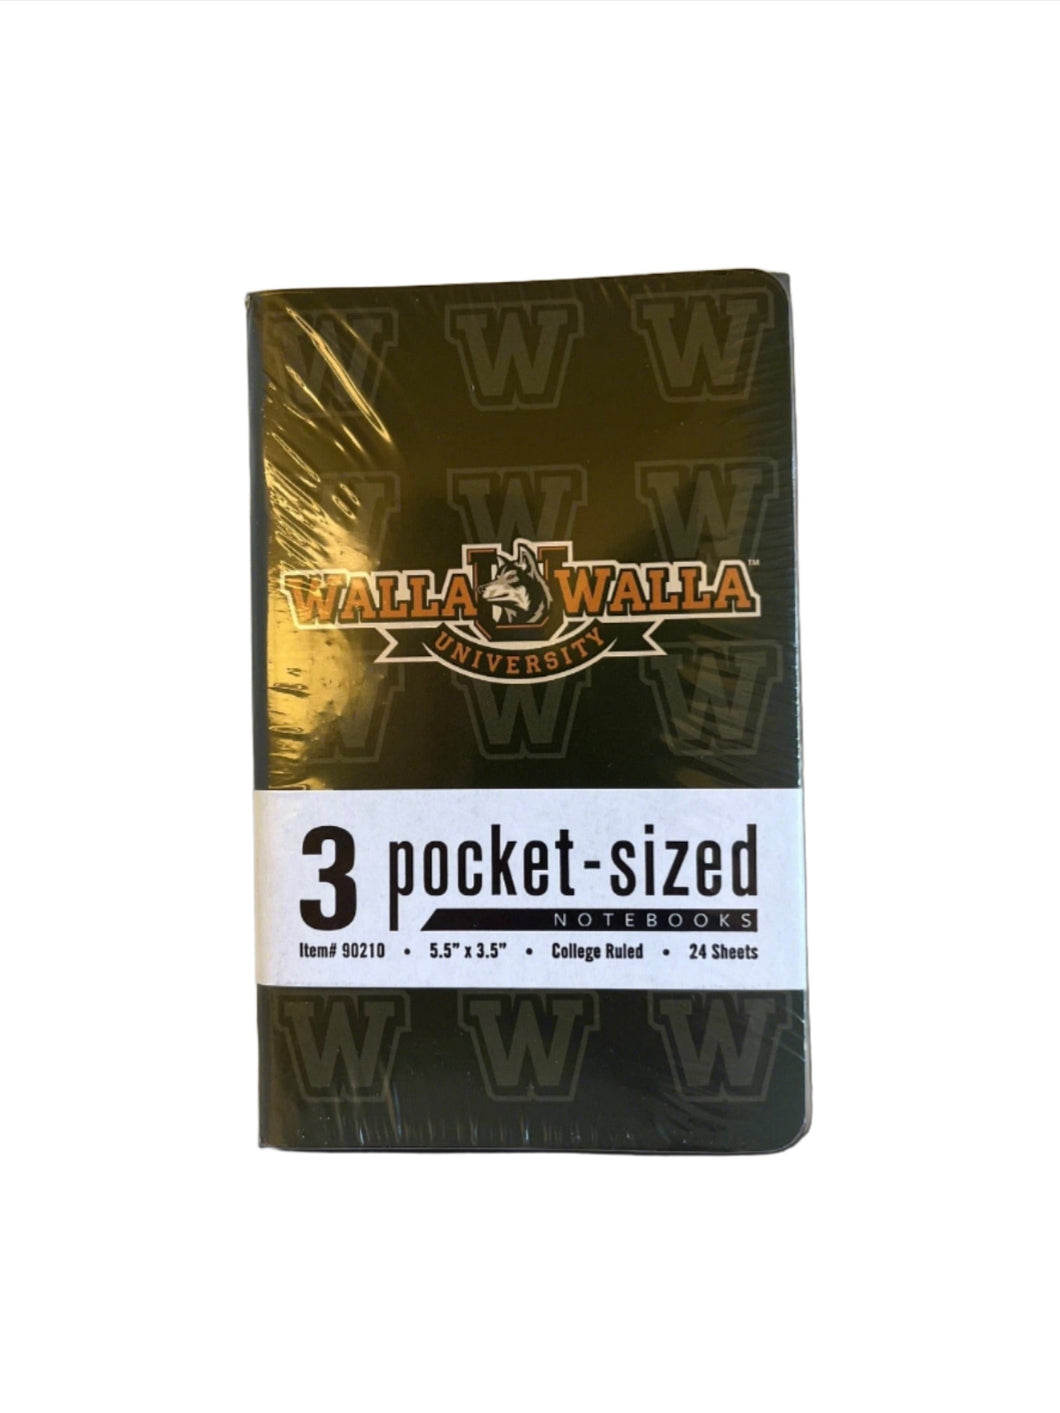 WWU Pocket-sized Notebook 5.5x3.5 College Ruled 3-pack, Roaring Spring